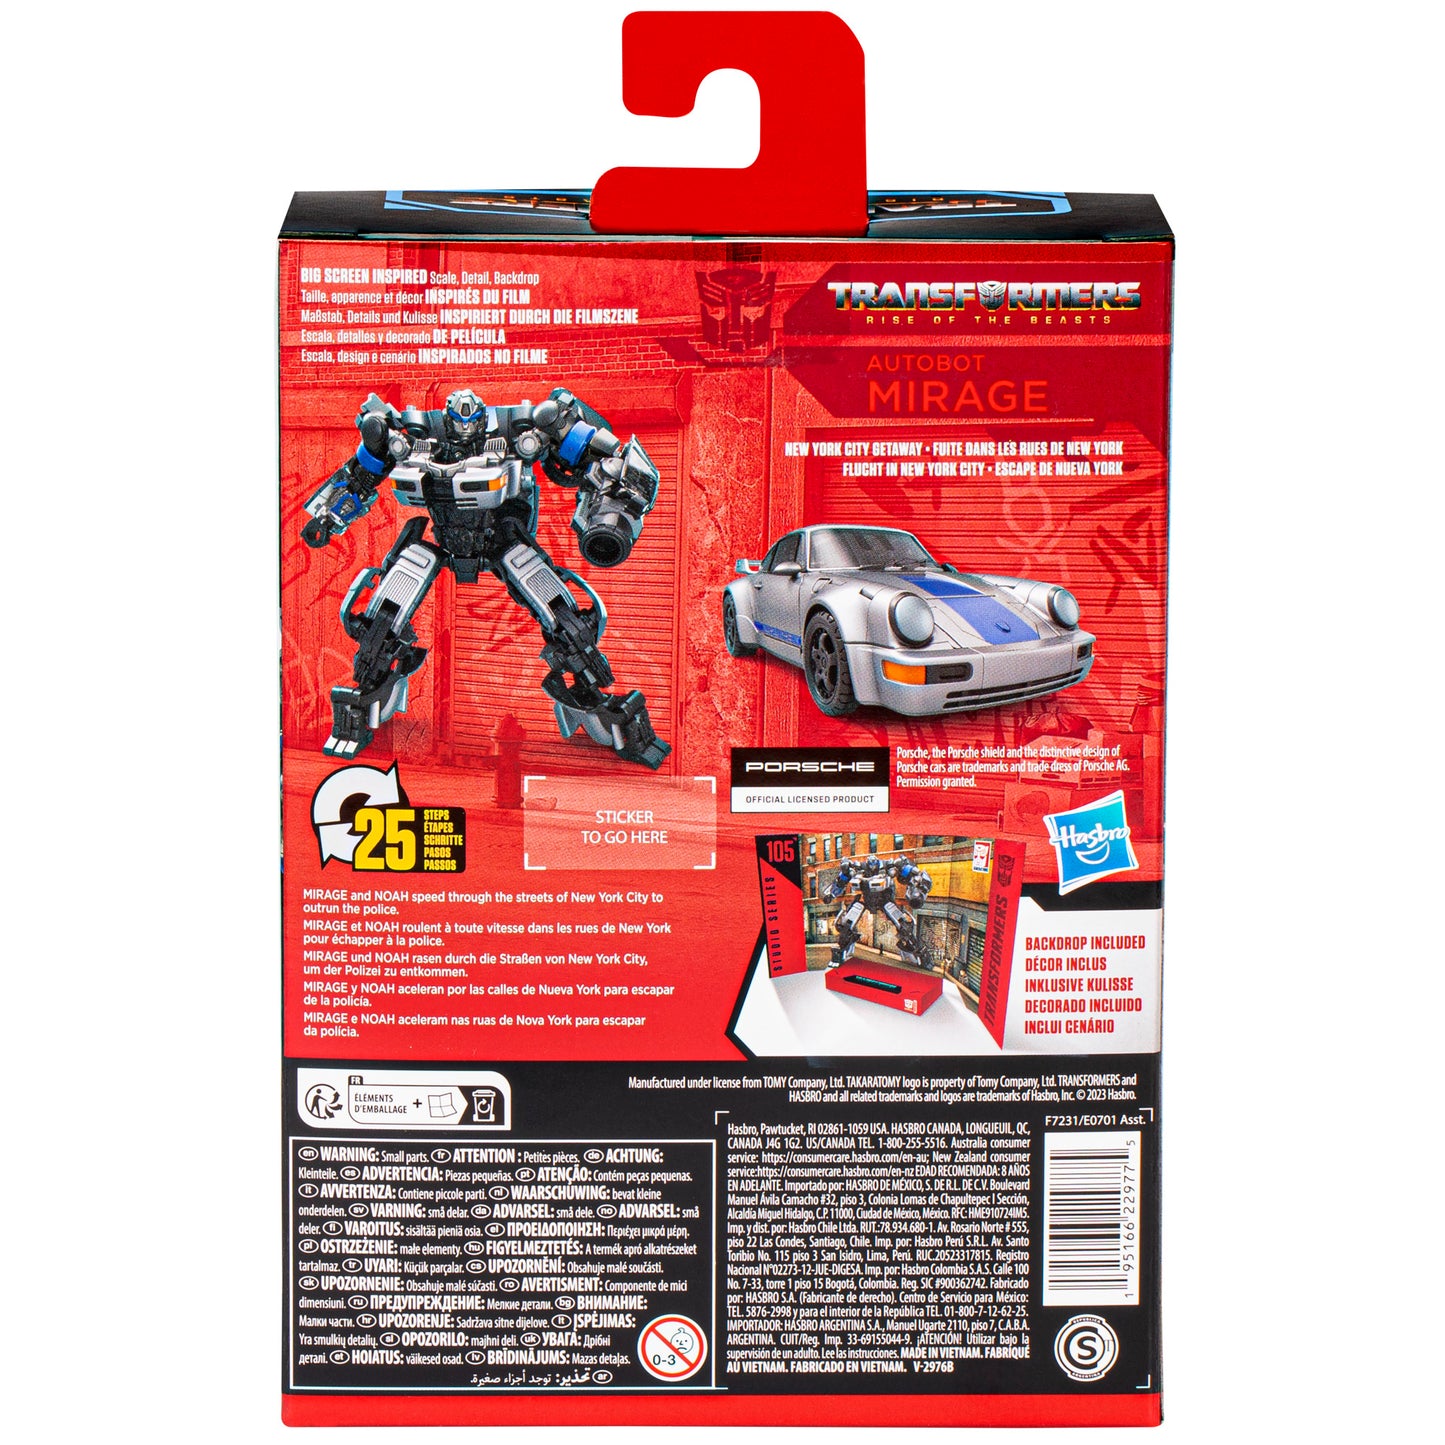 Autobot Mirage Action Figure Toy back view - Heretoserveyou